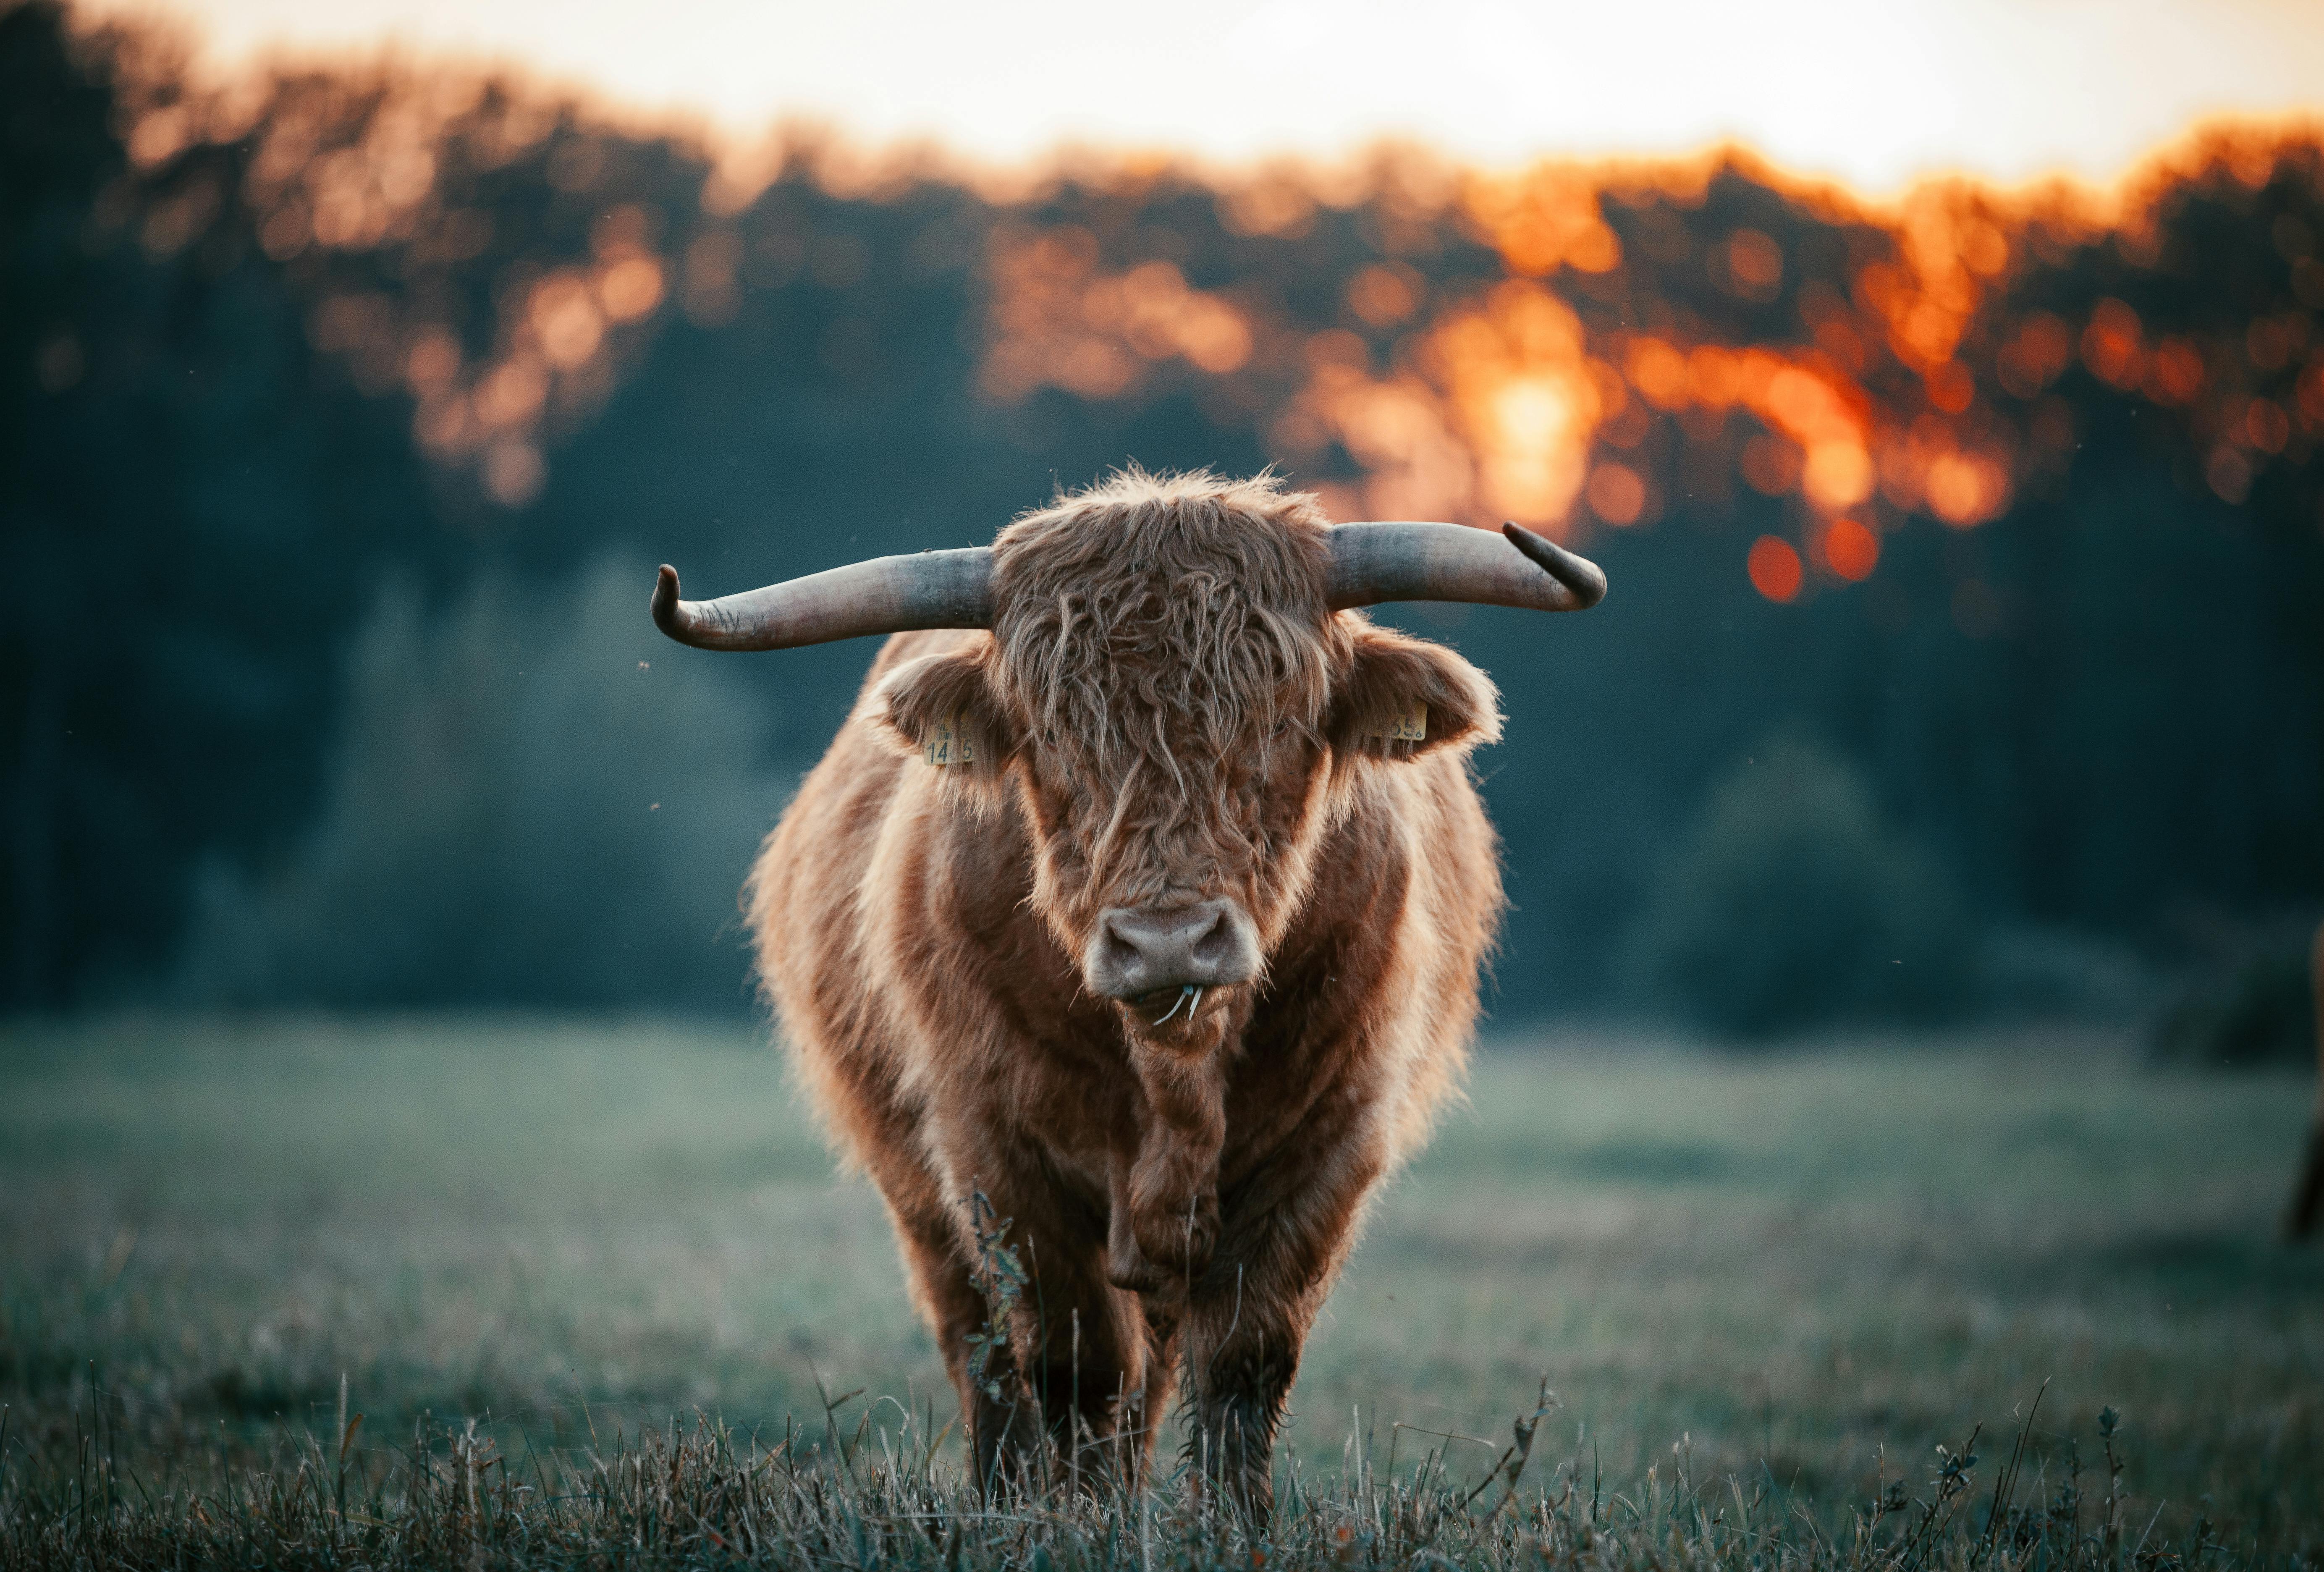 photo of a brown highland cattle with horns